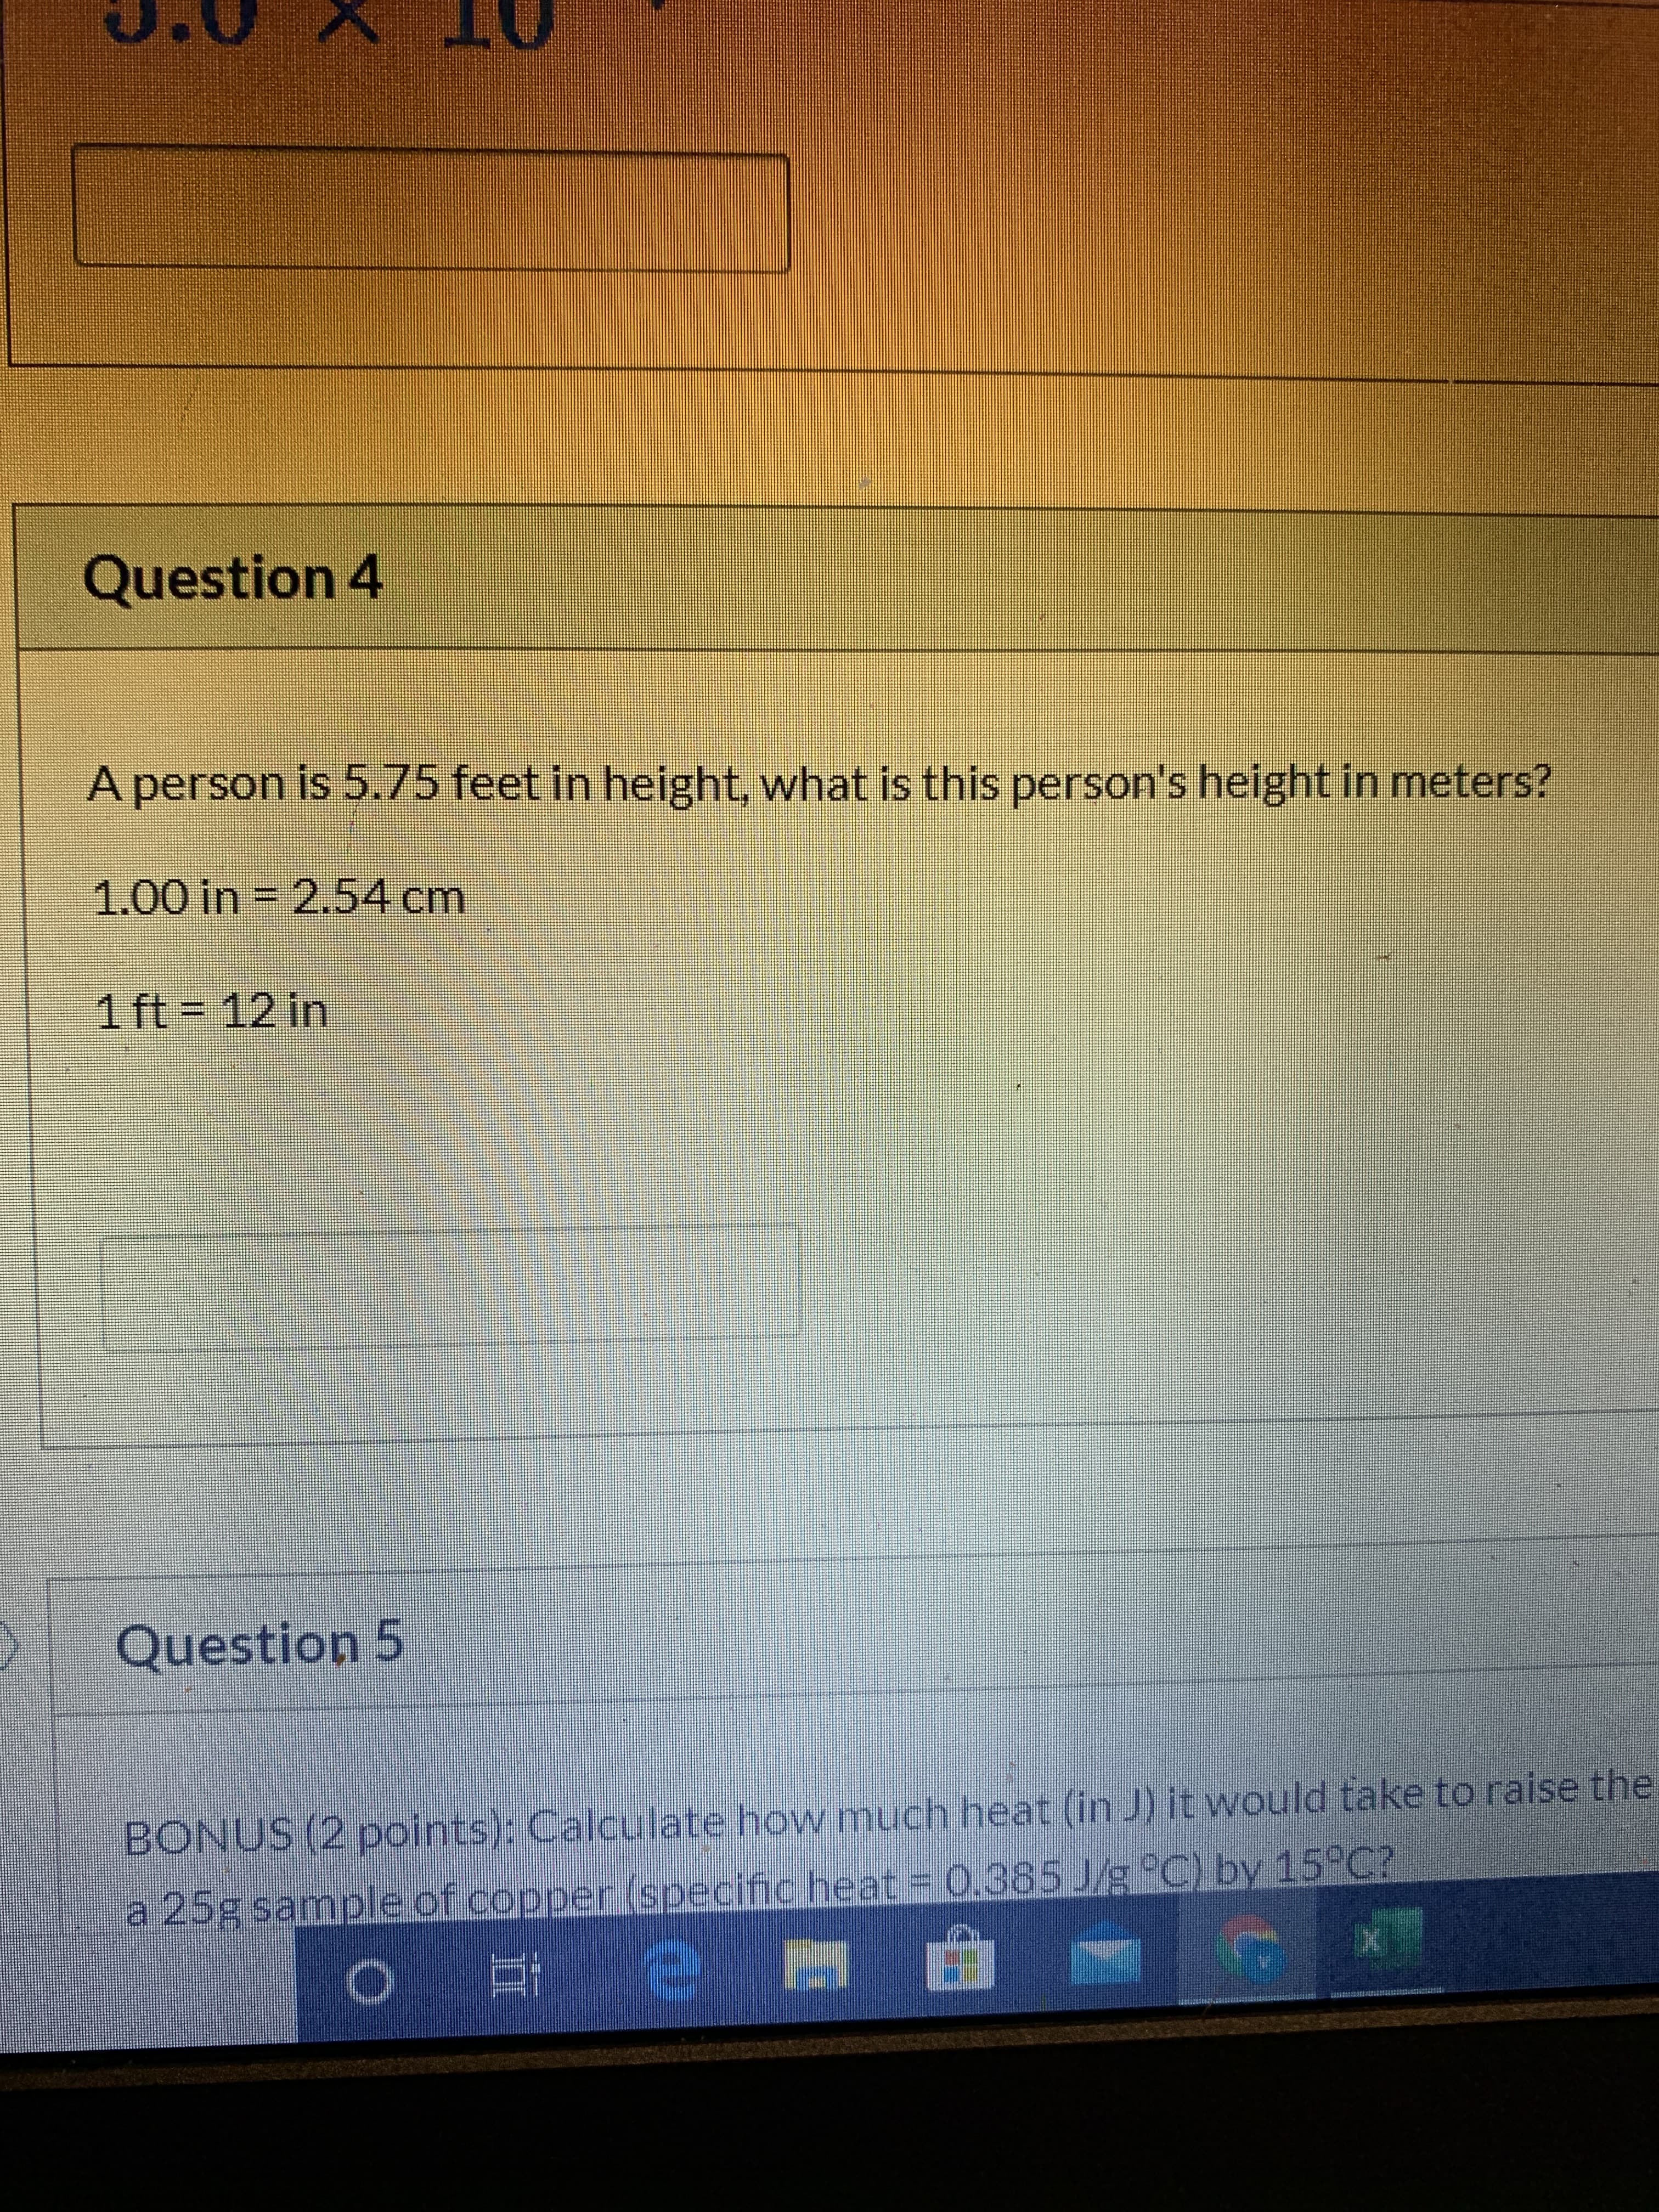 A person is 5.75 feet in height, what is this person's height in meters?
1.00 in 2.54 cm
1 ft = 12 in
